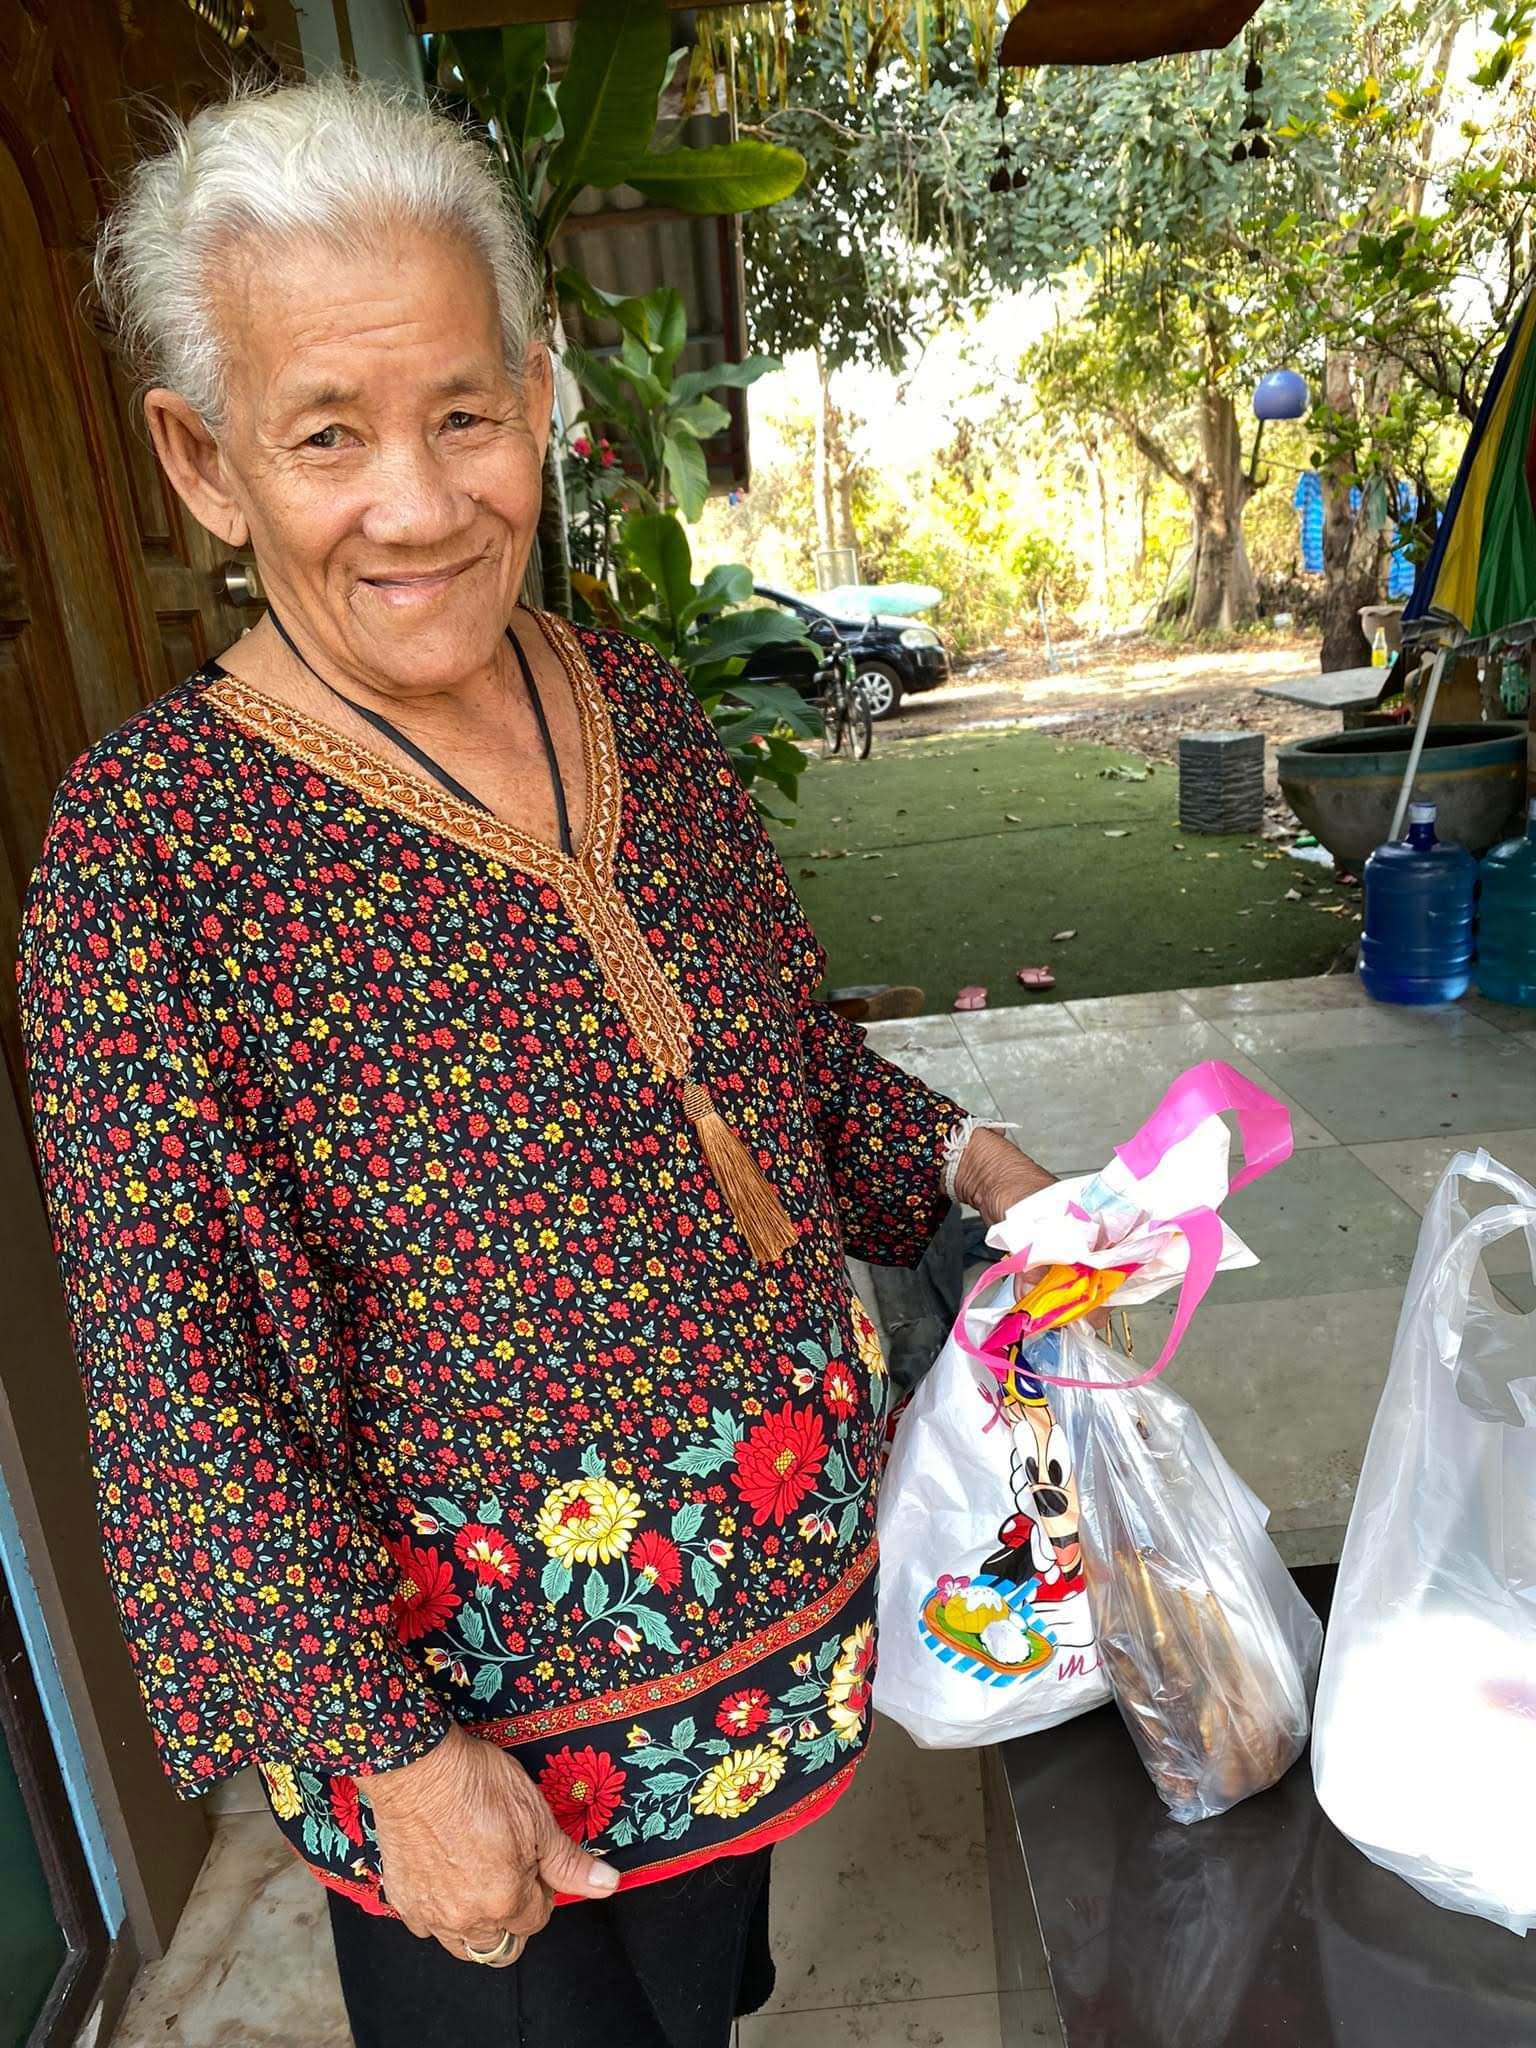 thai elder woman Nong standing with a bag of food